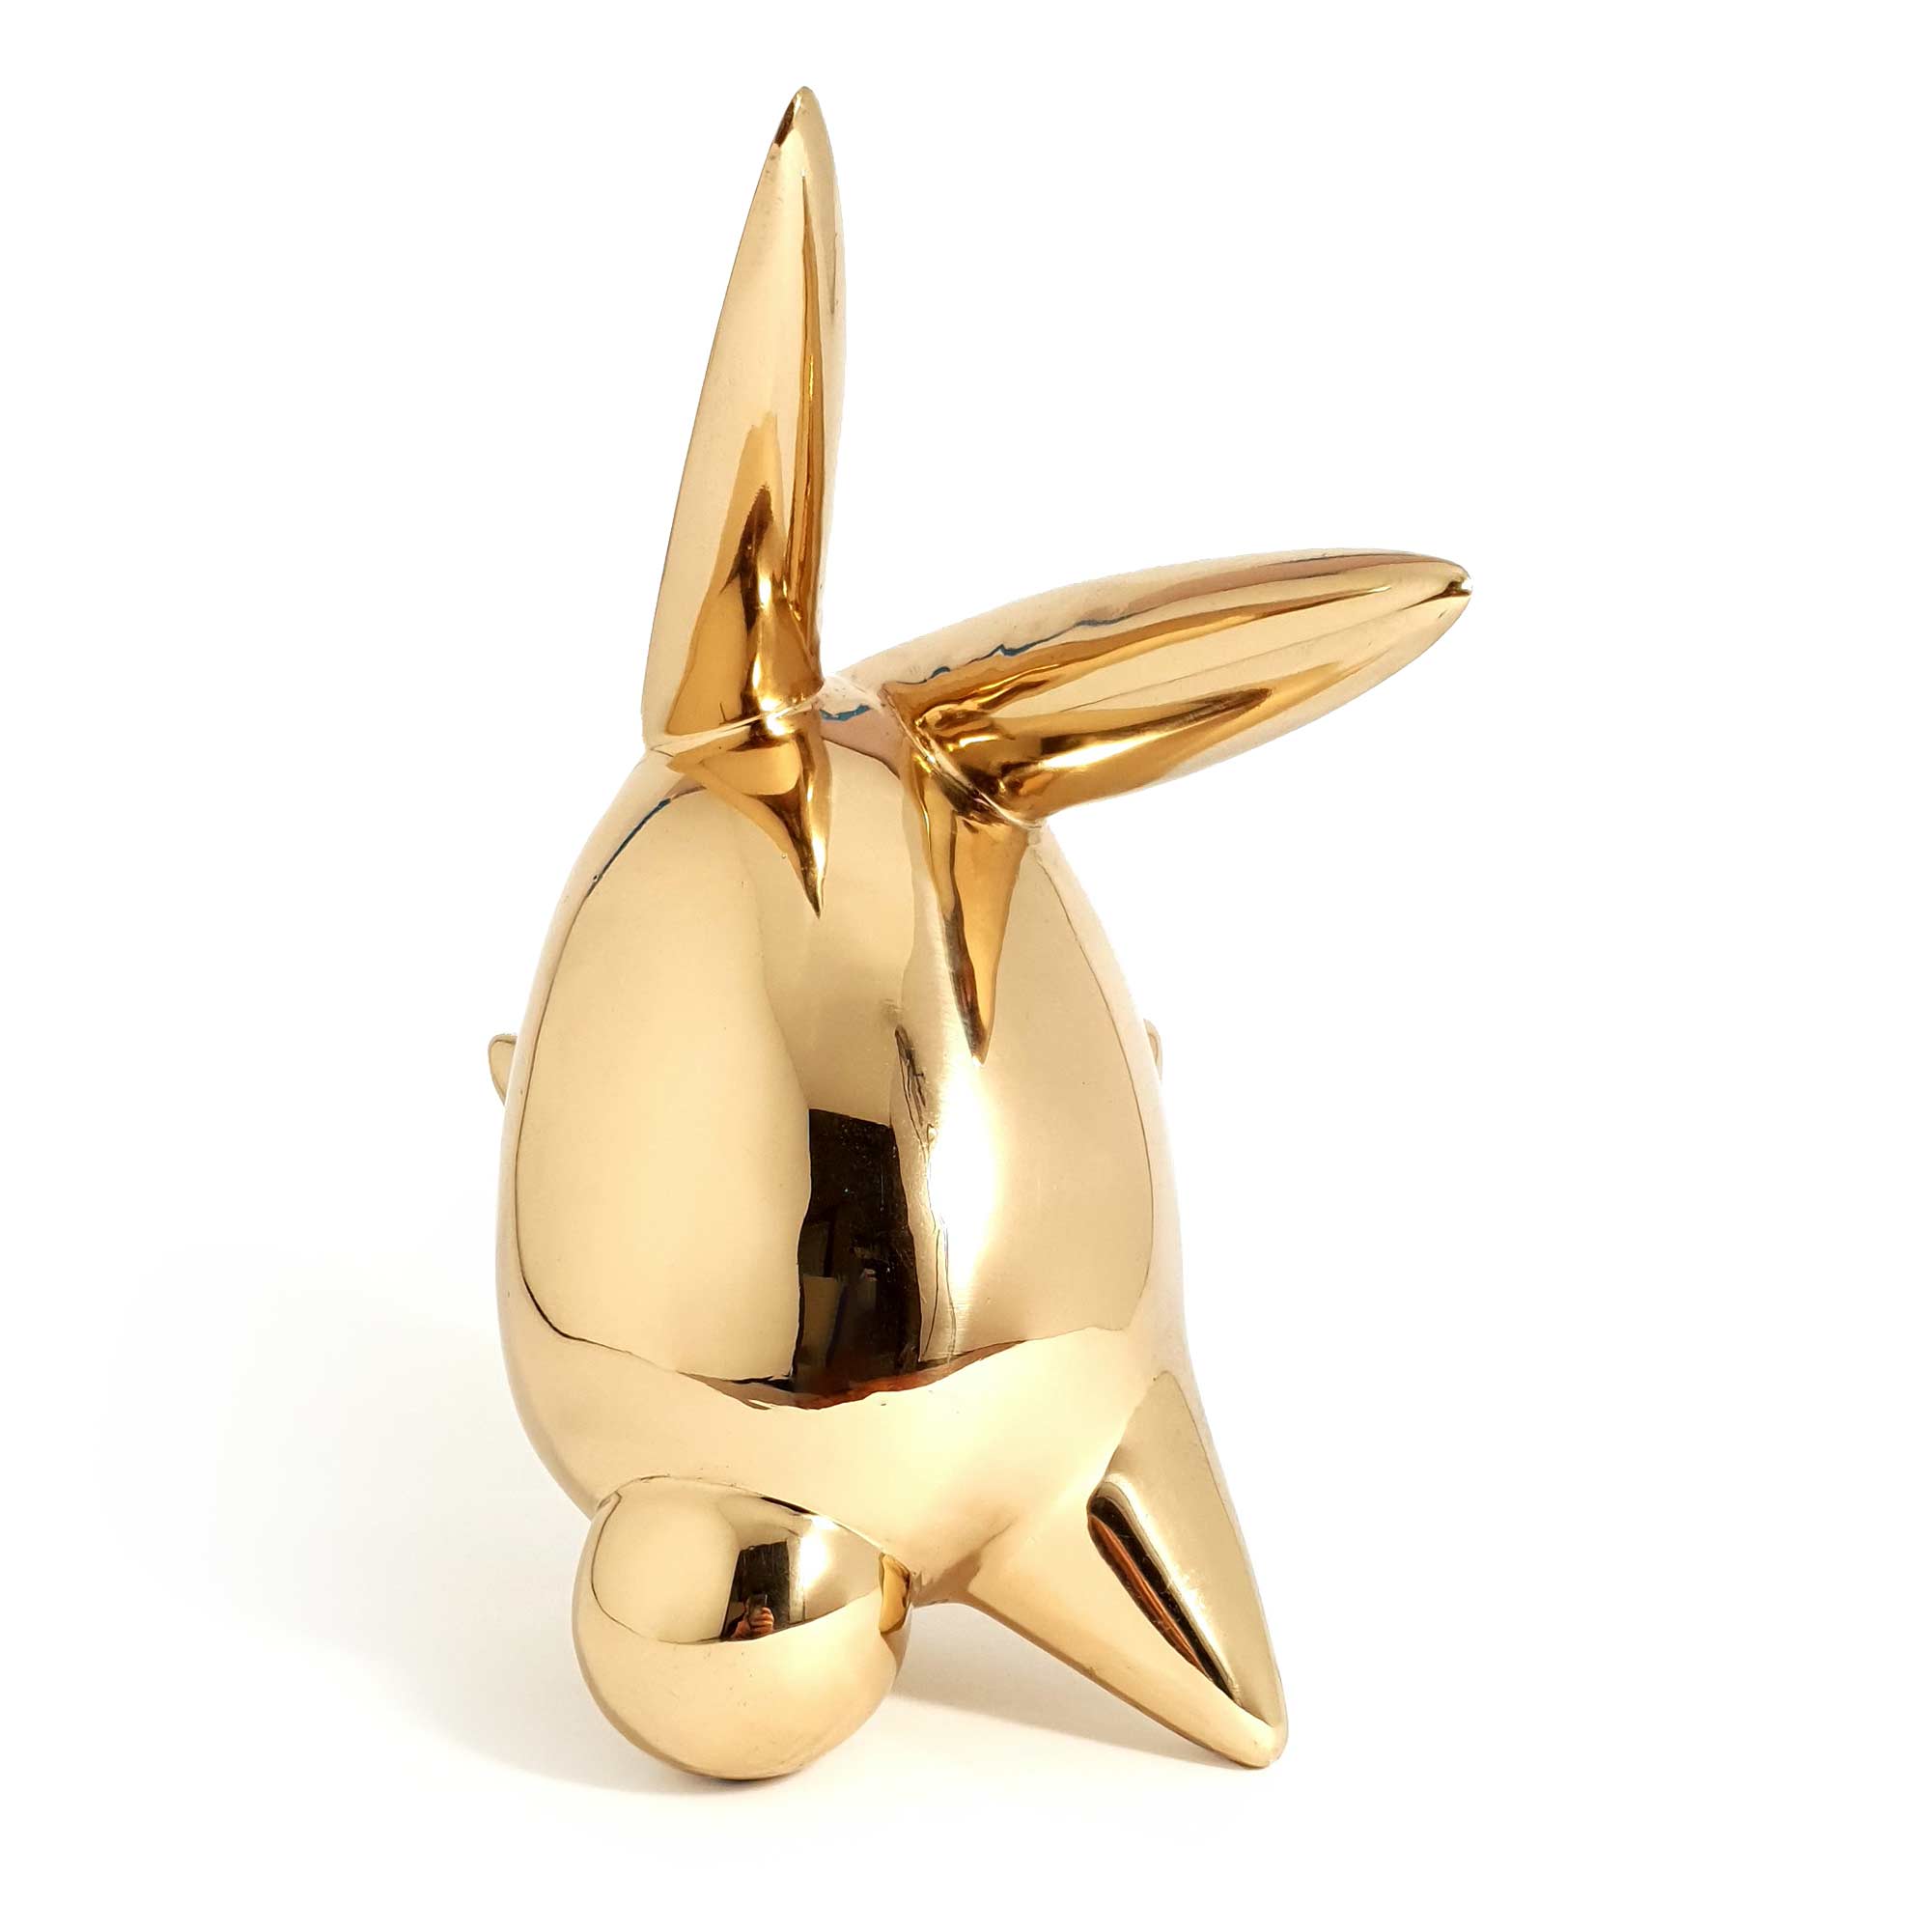 Flight or Fight, bunny rabbit sculpture, gold Mirror Polished Stainless Steel Sculpture, by artist Ferdi B Dick, back view 